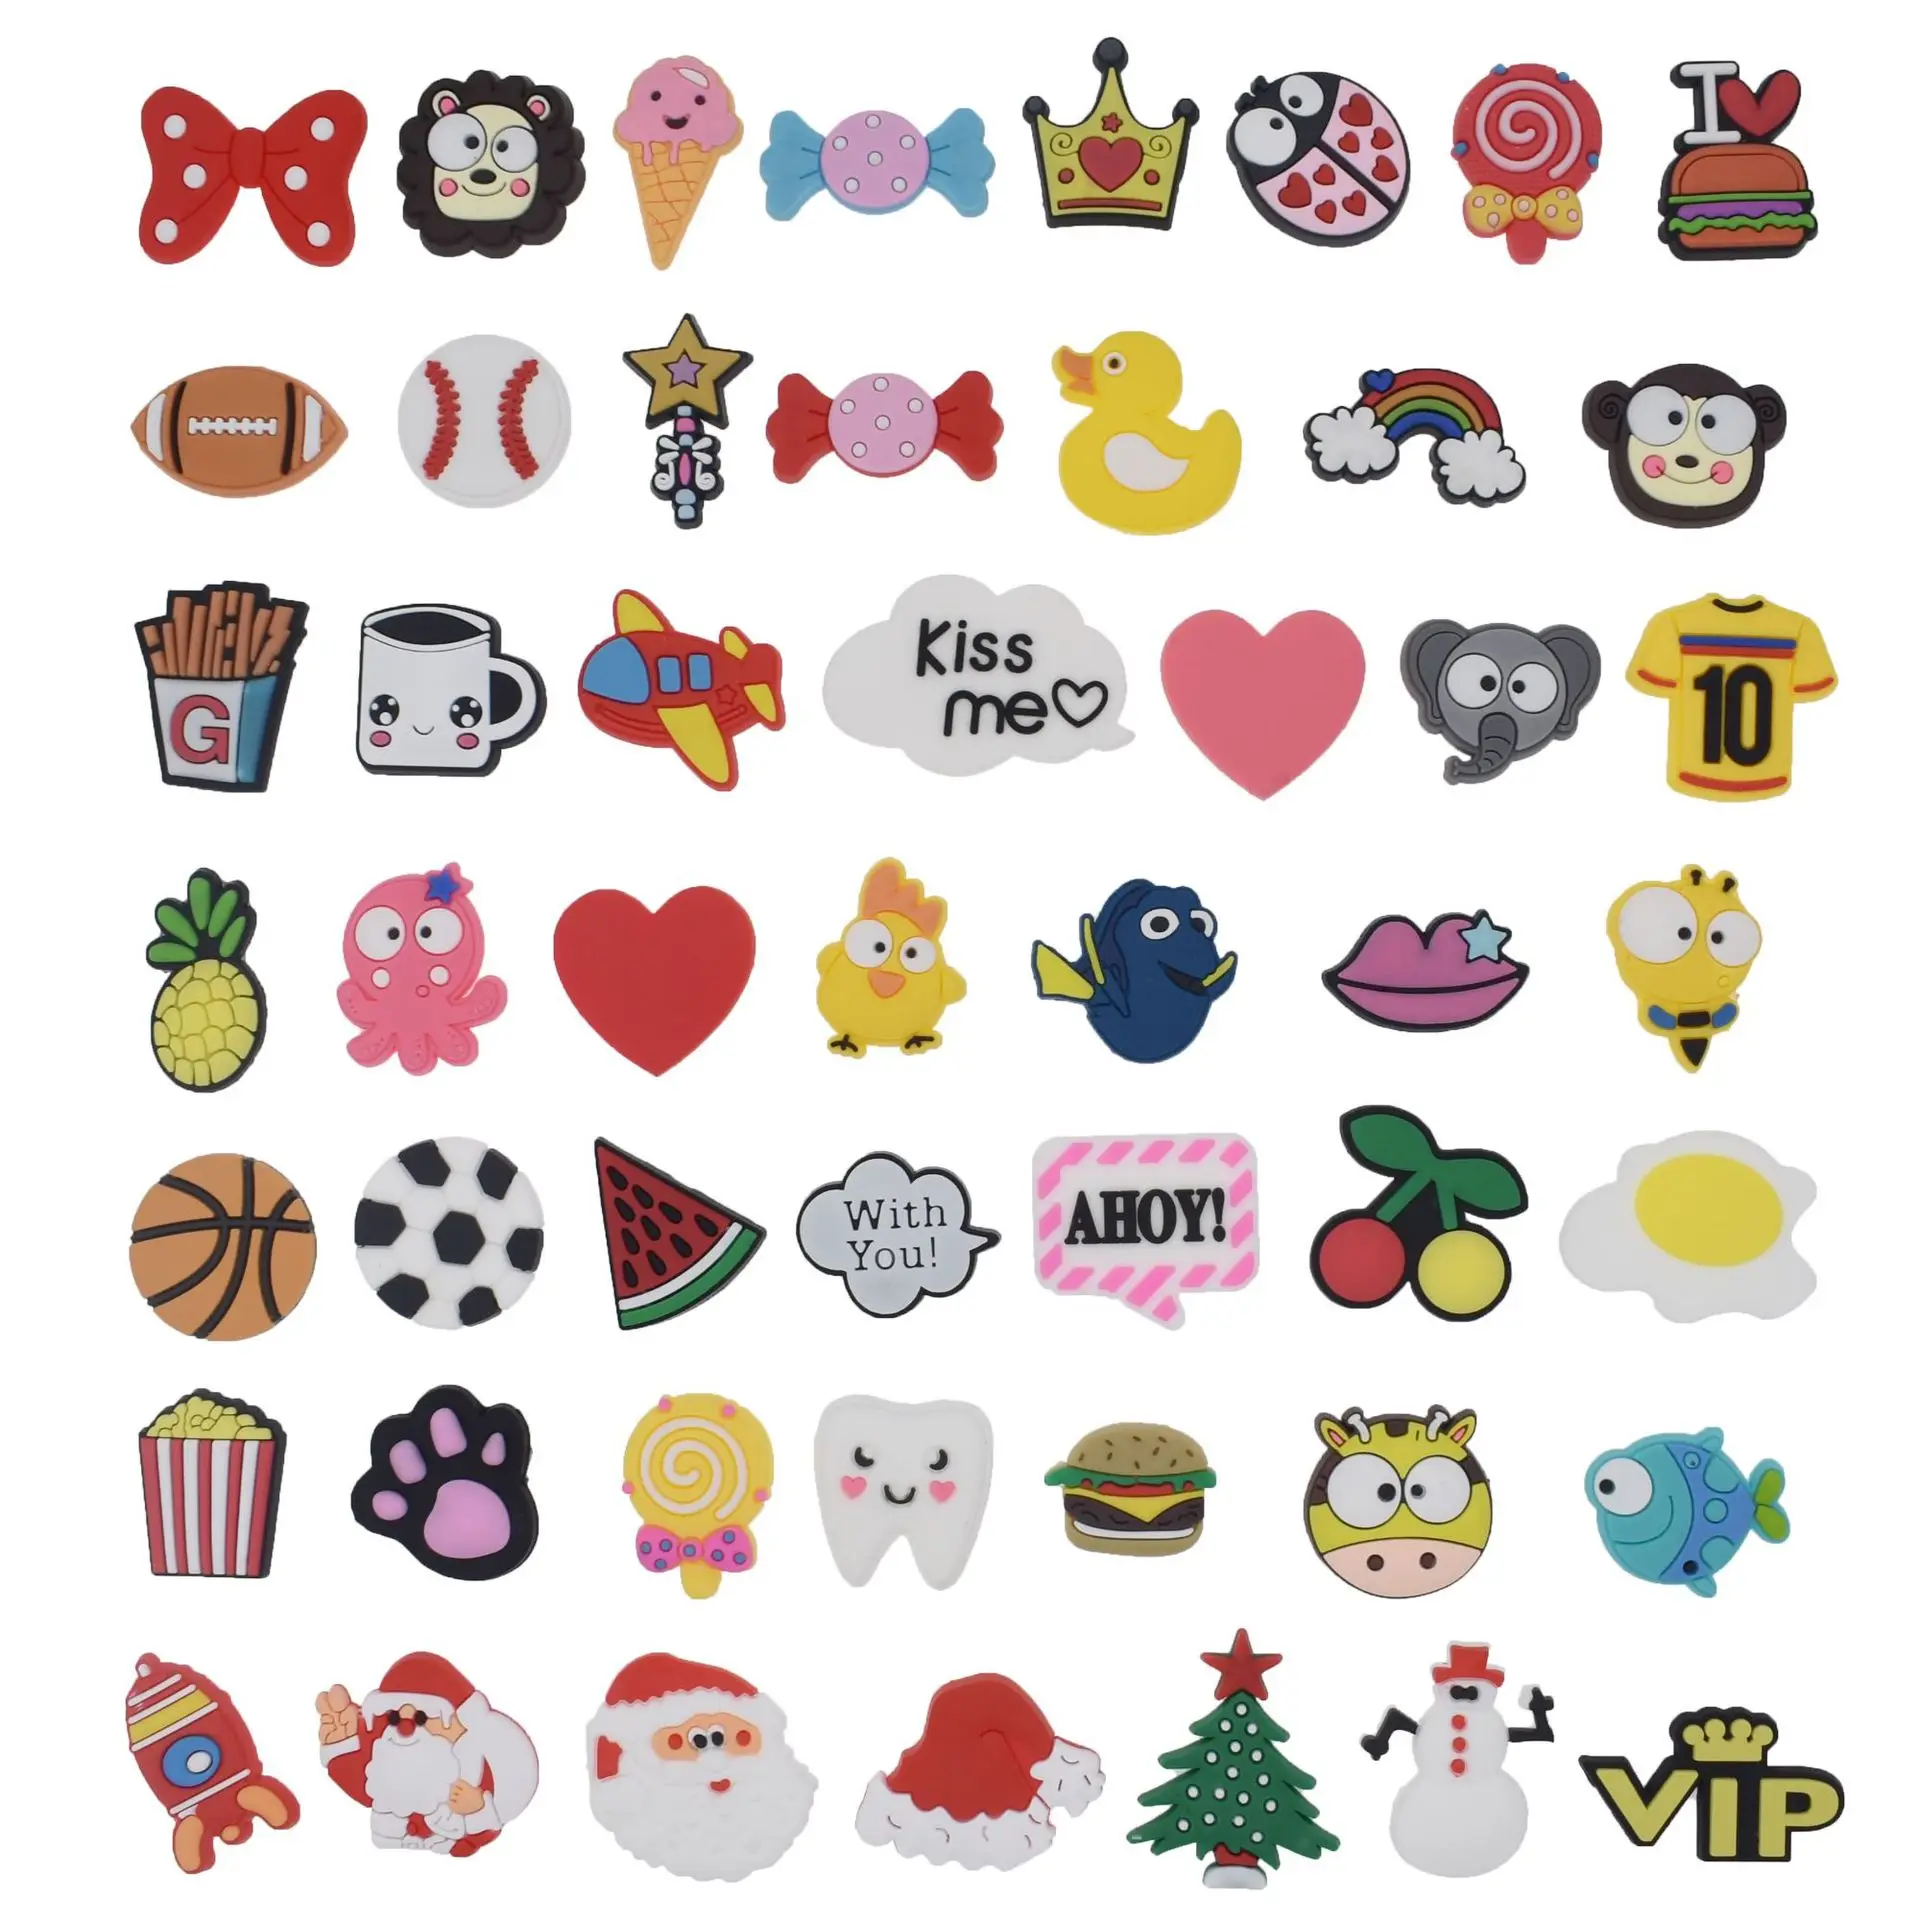 50-200 PCS Wholesale PVC Shoe Charms Mix Cartoon Flower Animal Letter Numbers Crocs Charms Shoe Accessories Kids Adults Gifts